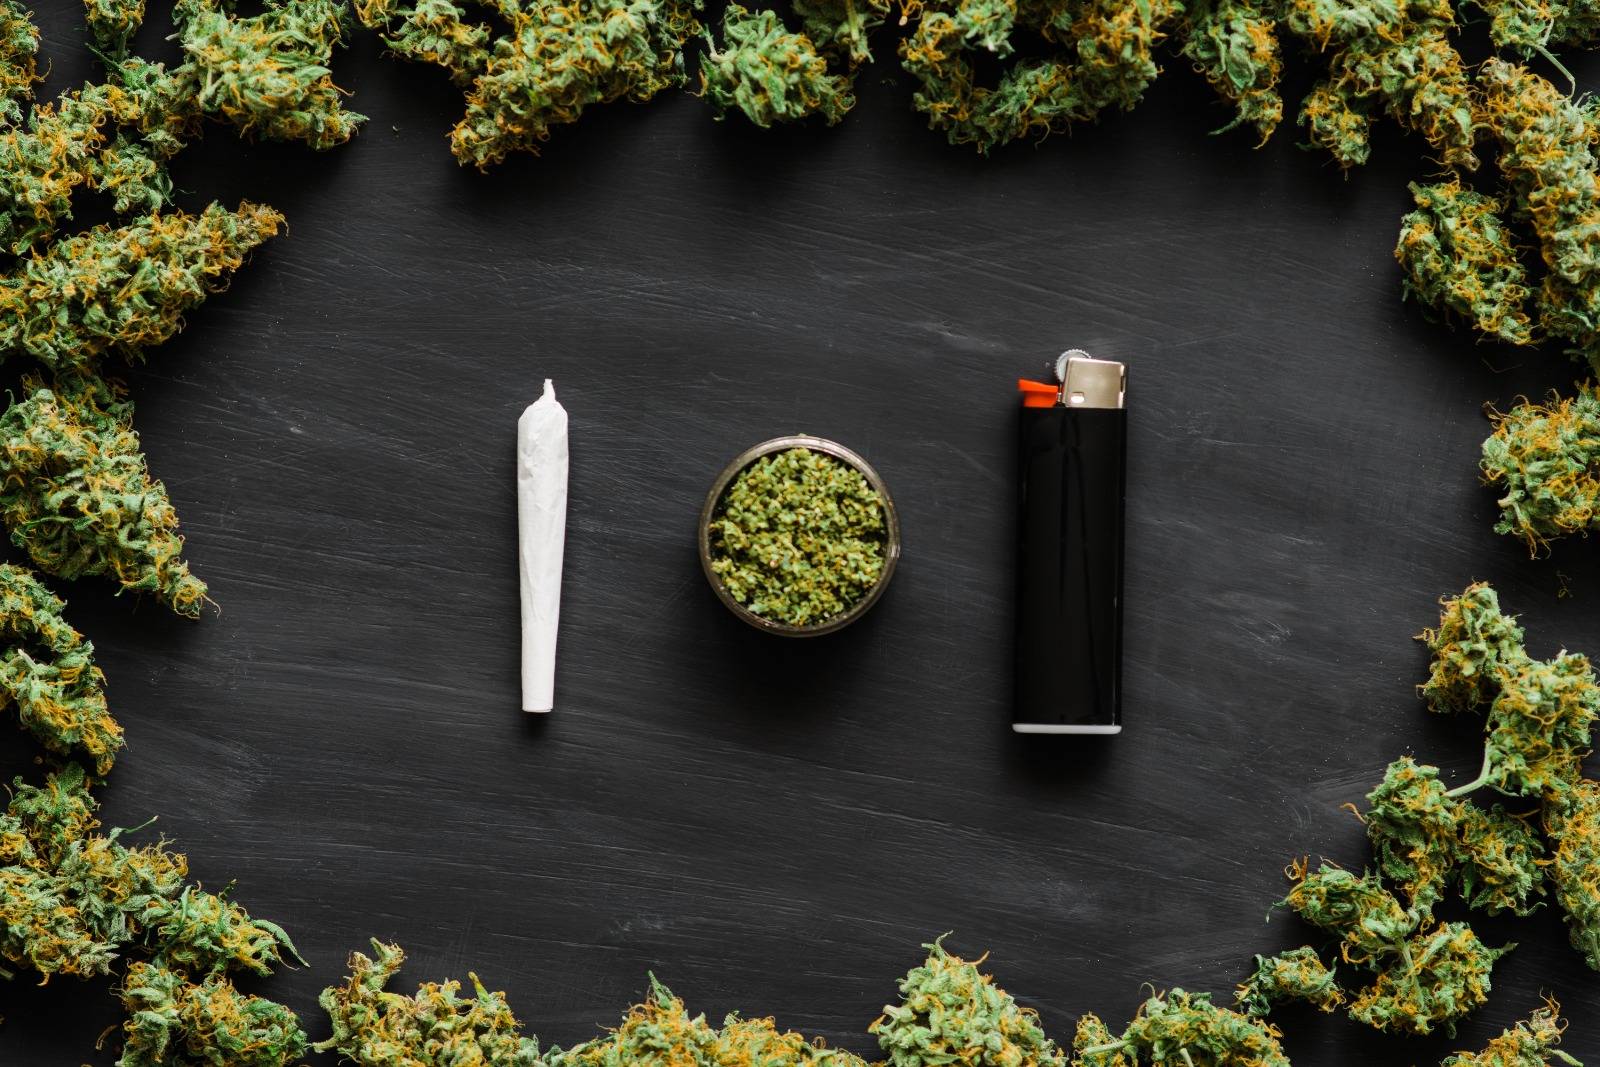 Celebrate 420 with meaning with cannabis, joint, and lighter. SpeedGreens.